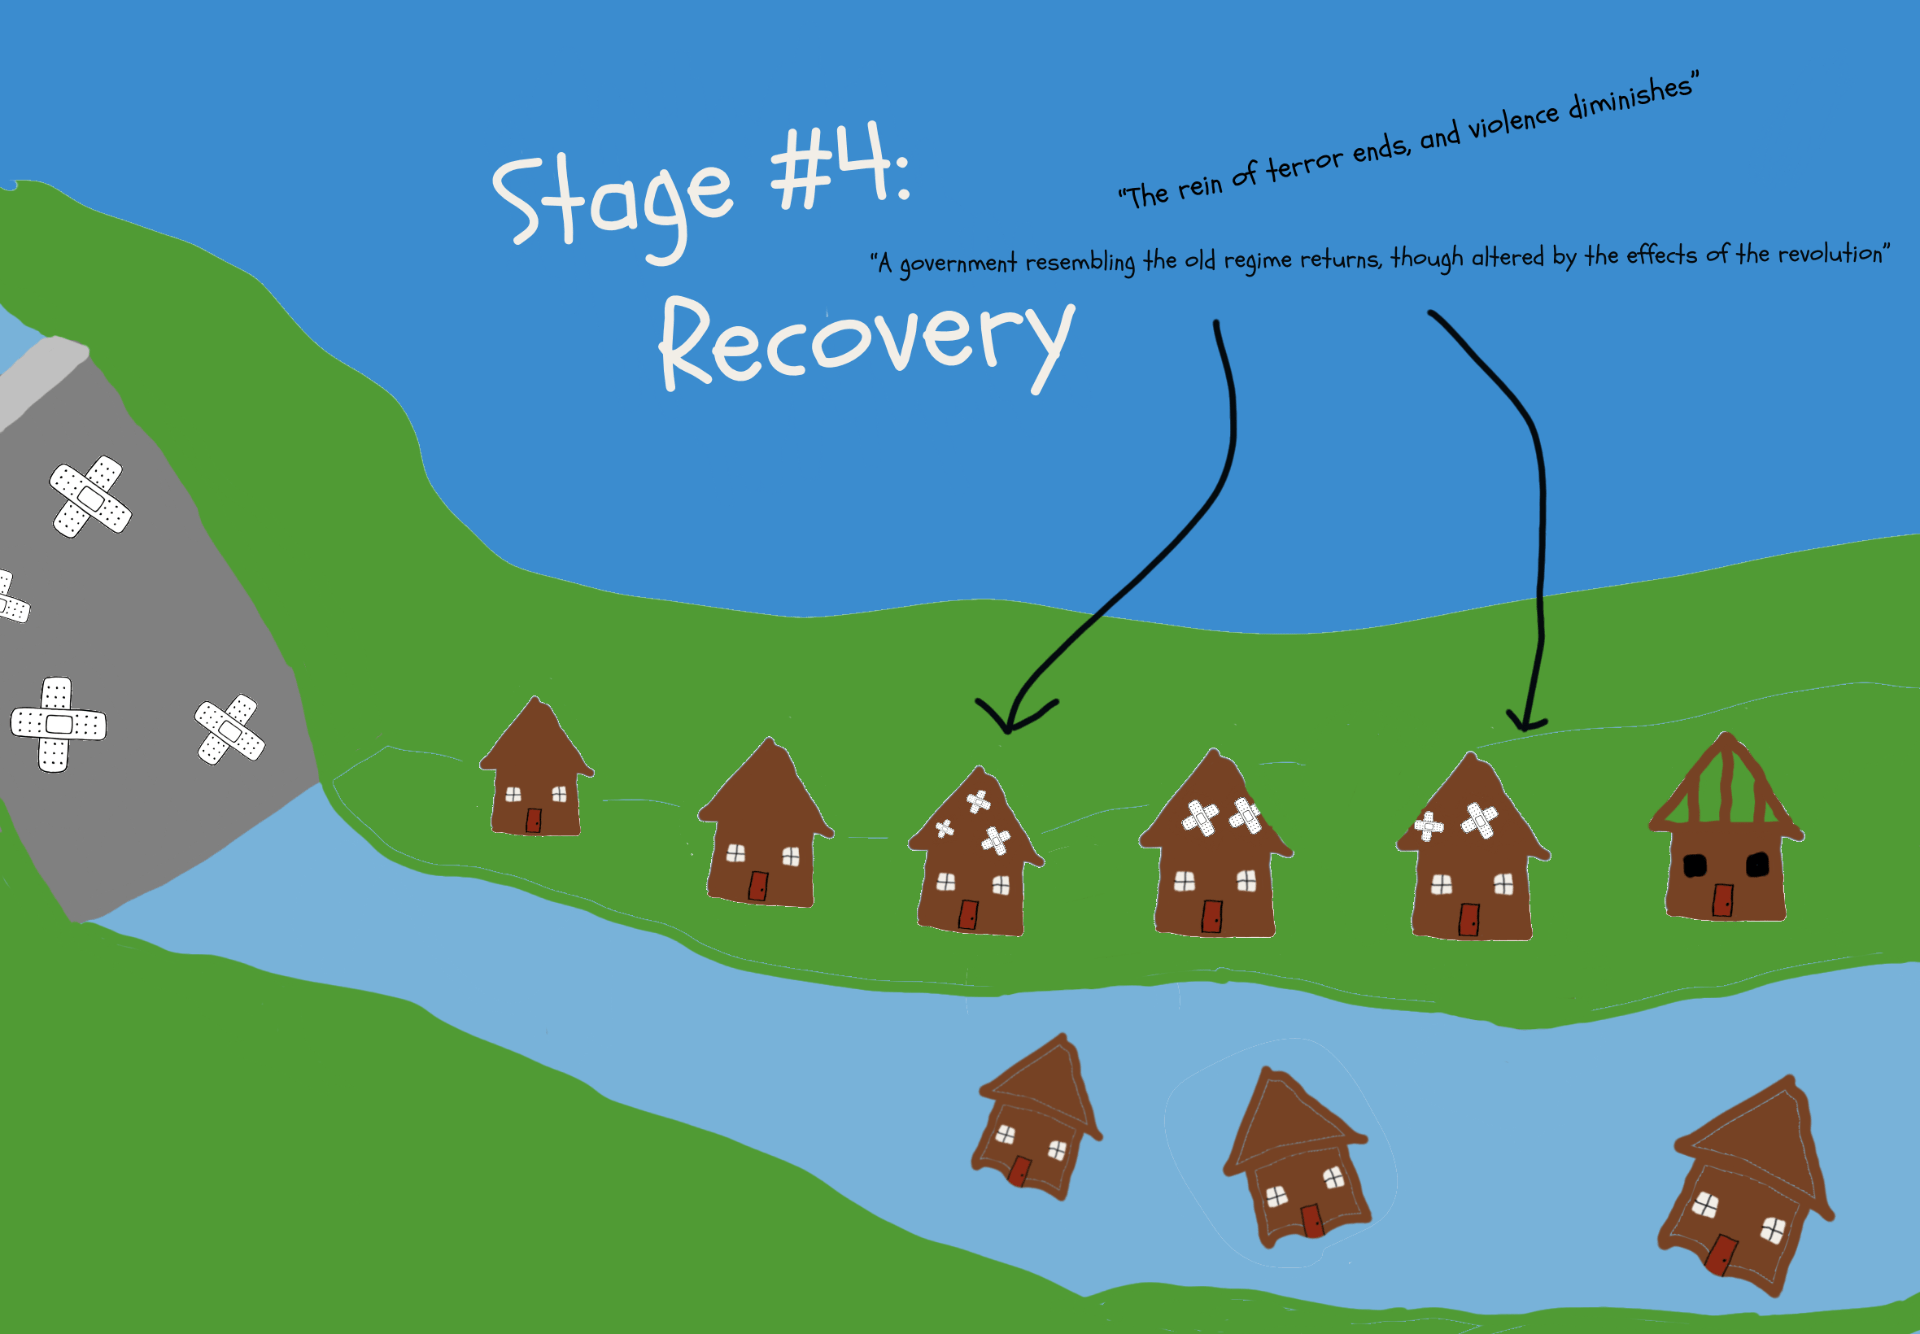 Stage 4: Recovery